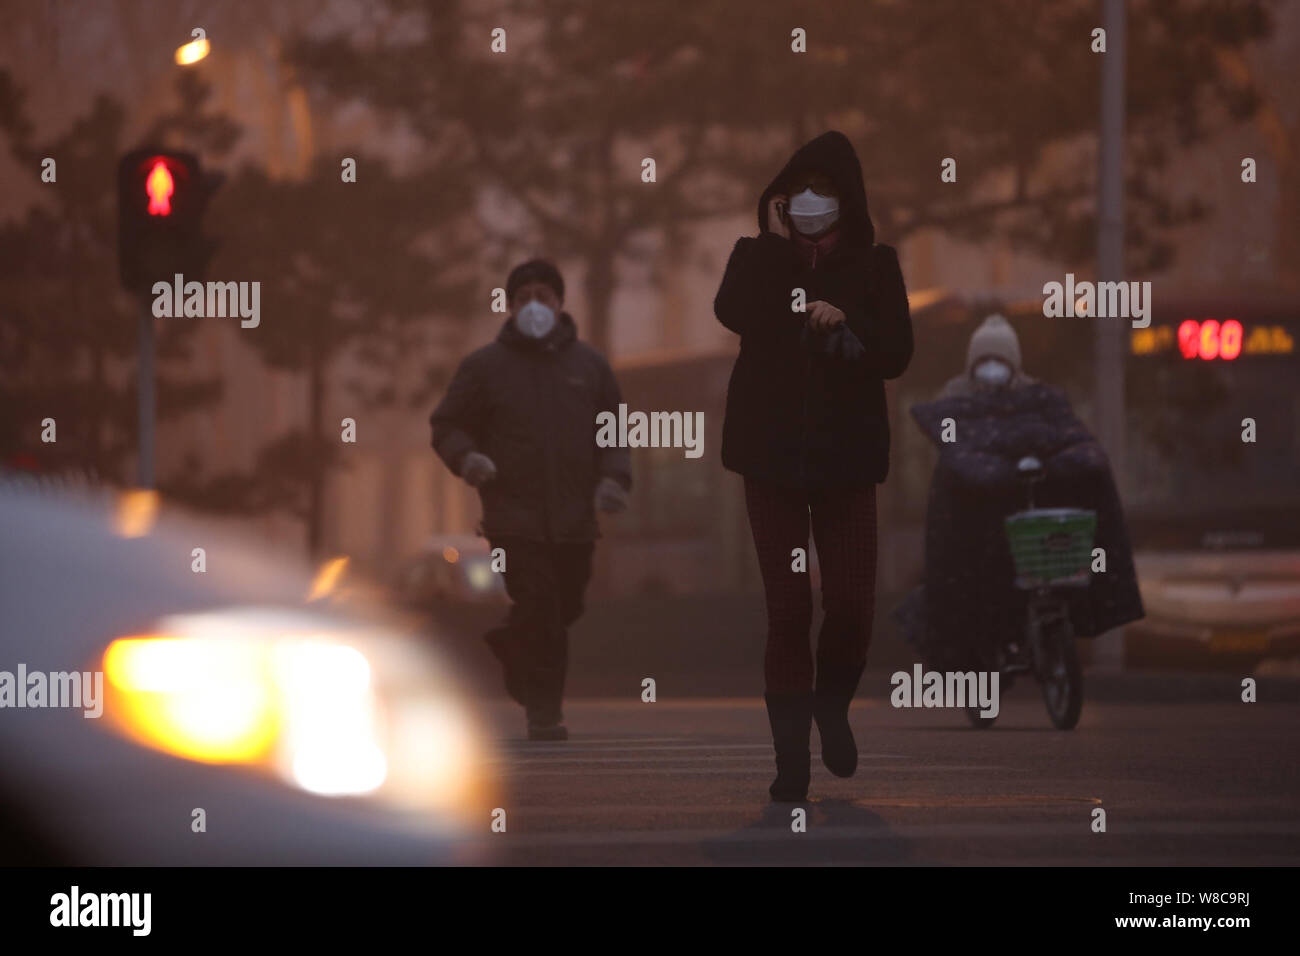 Pedestrians wearing face masks walk across a road in heavy smog in Beijing, China, 22 December 2015.   Air pollution in Beijing worsened even as envir Stock Photo